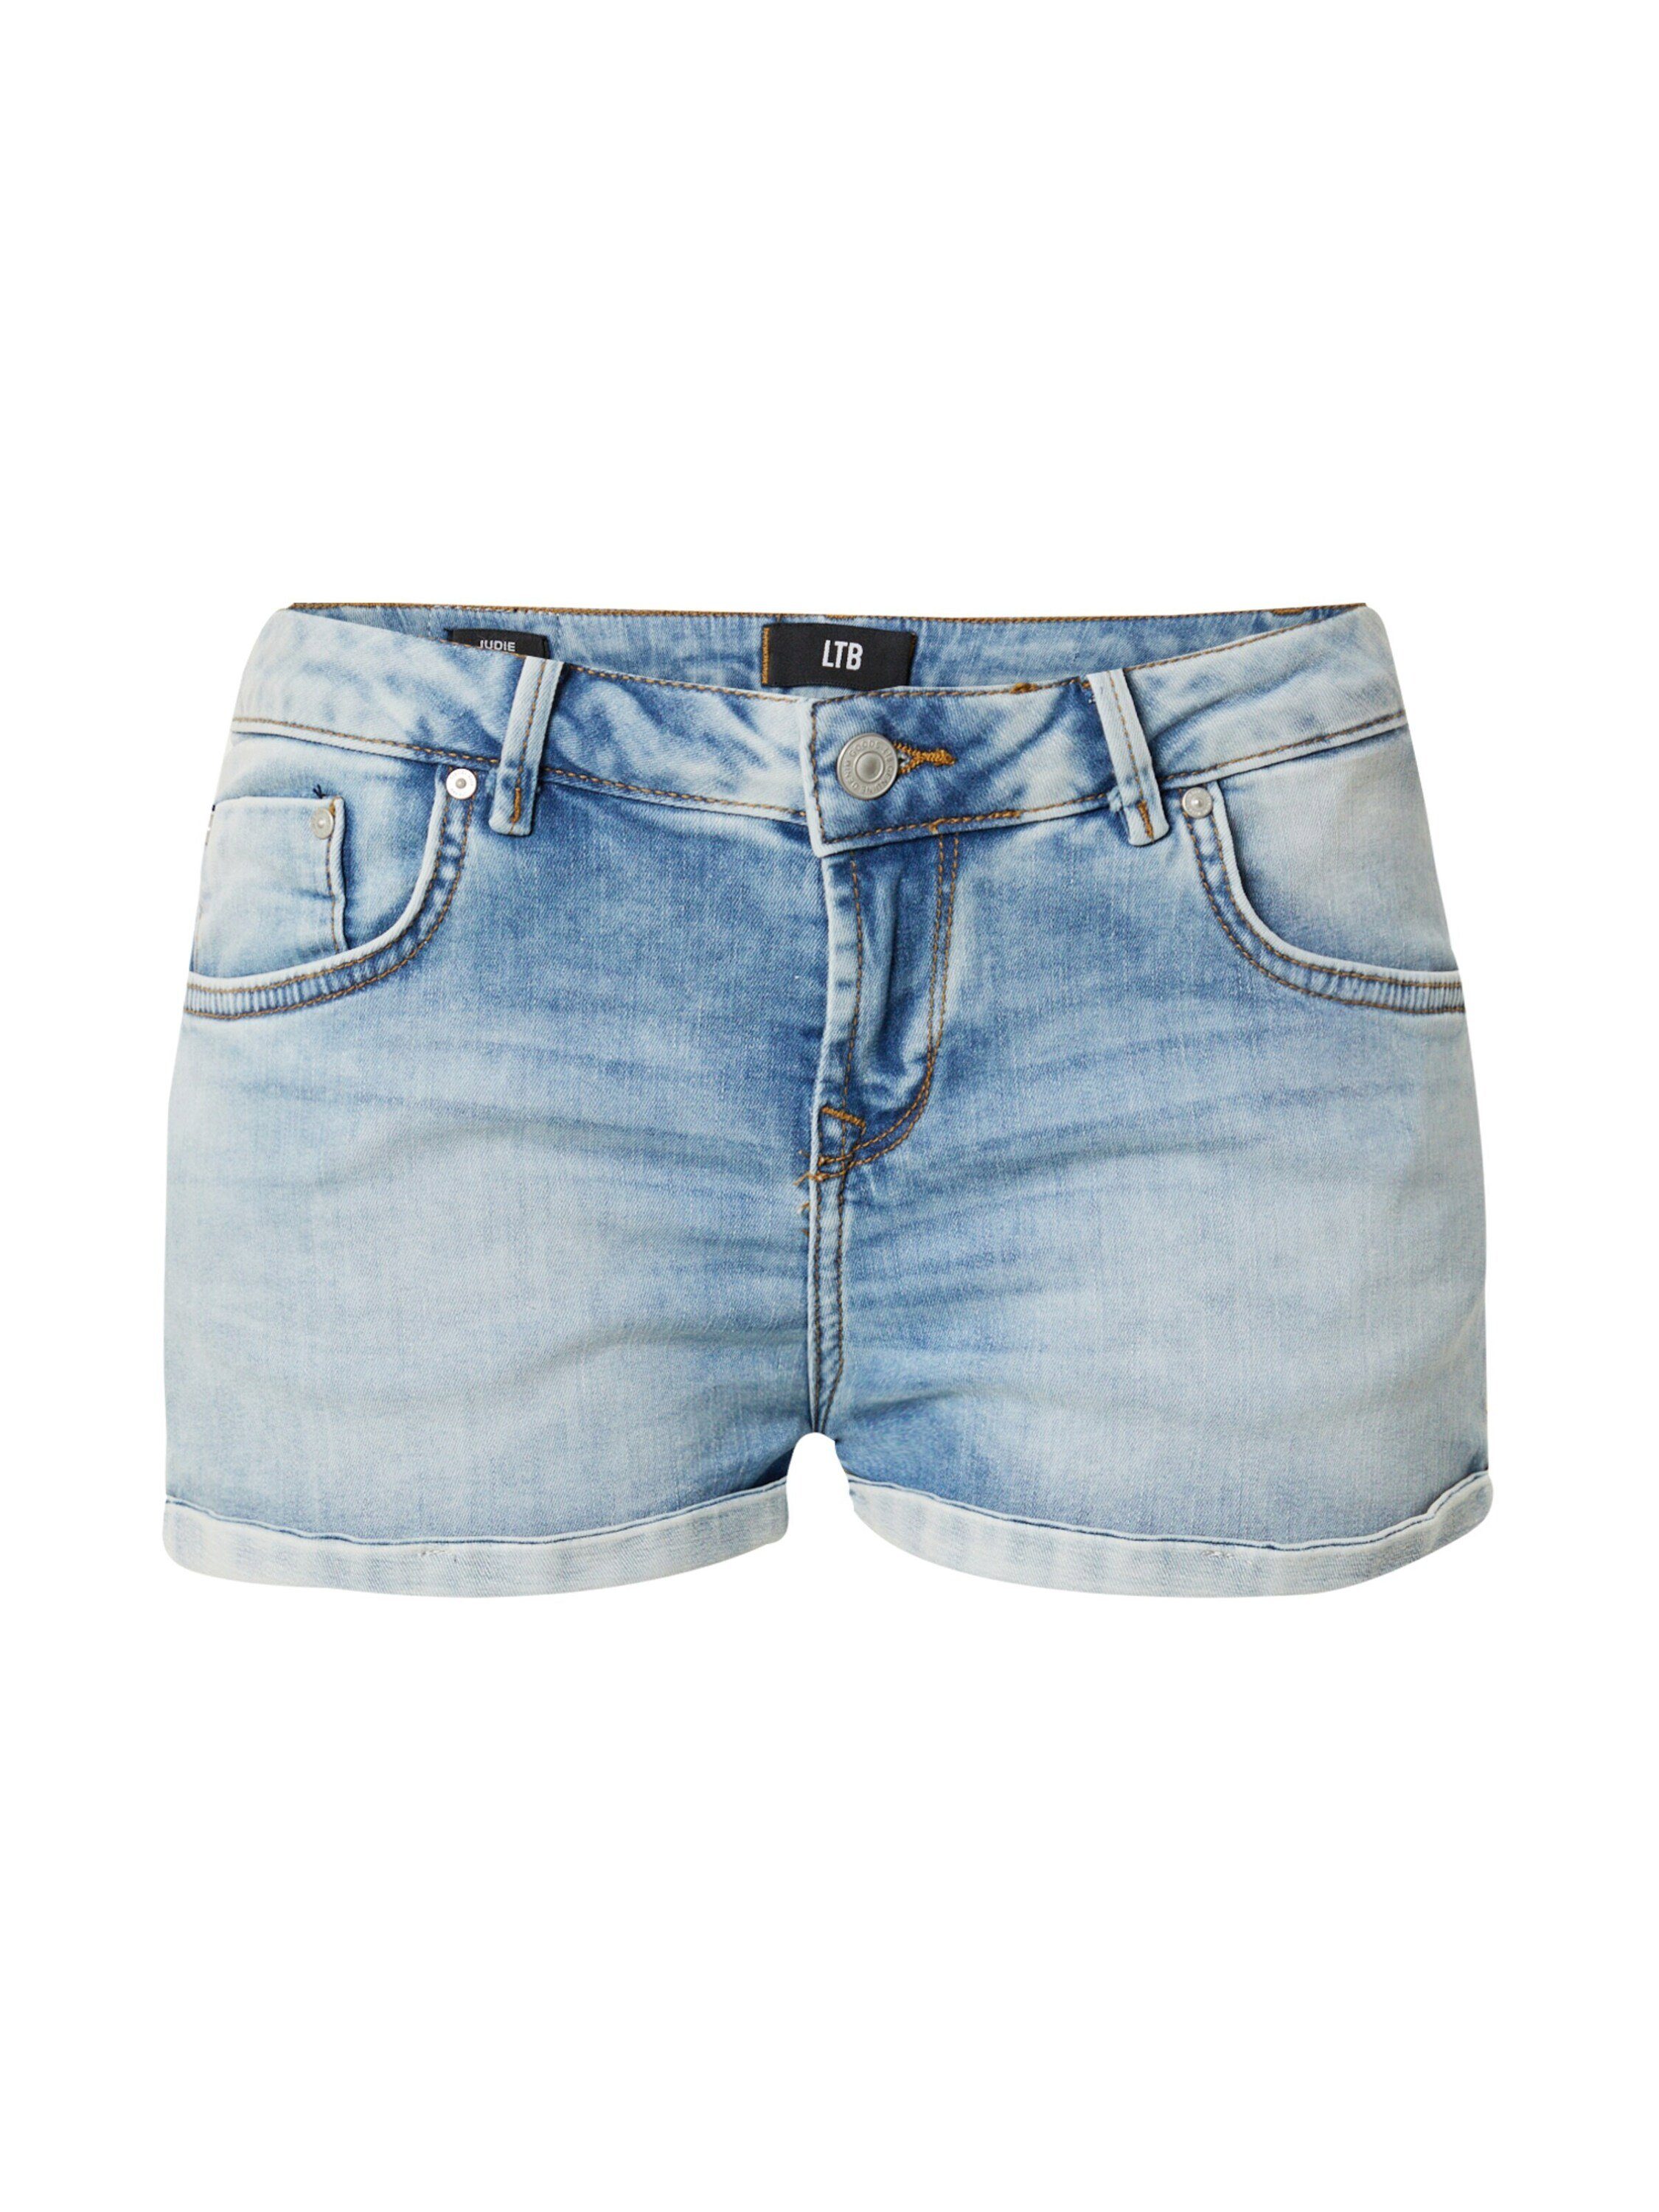 Judie Detail Weiteres LTB Patches, (1-tlg) Jeansshorts